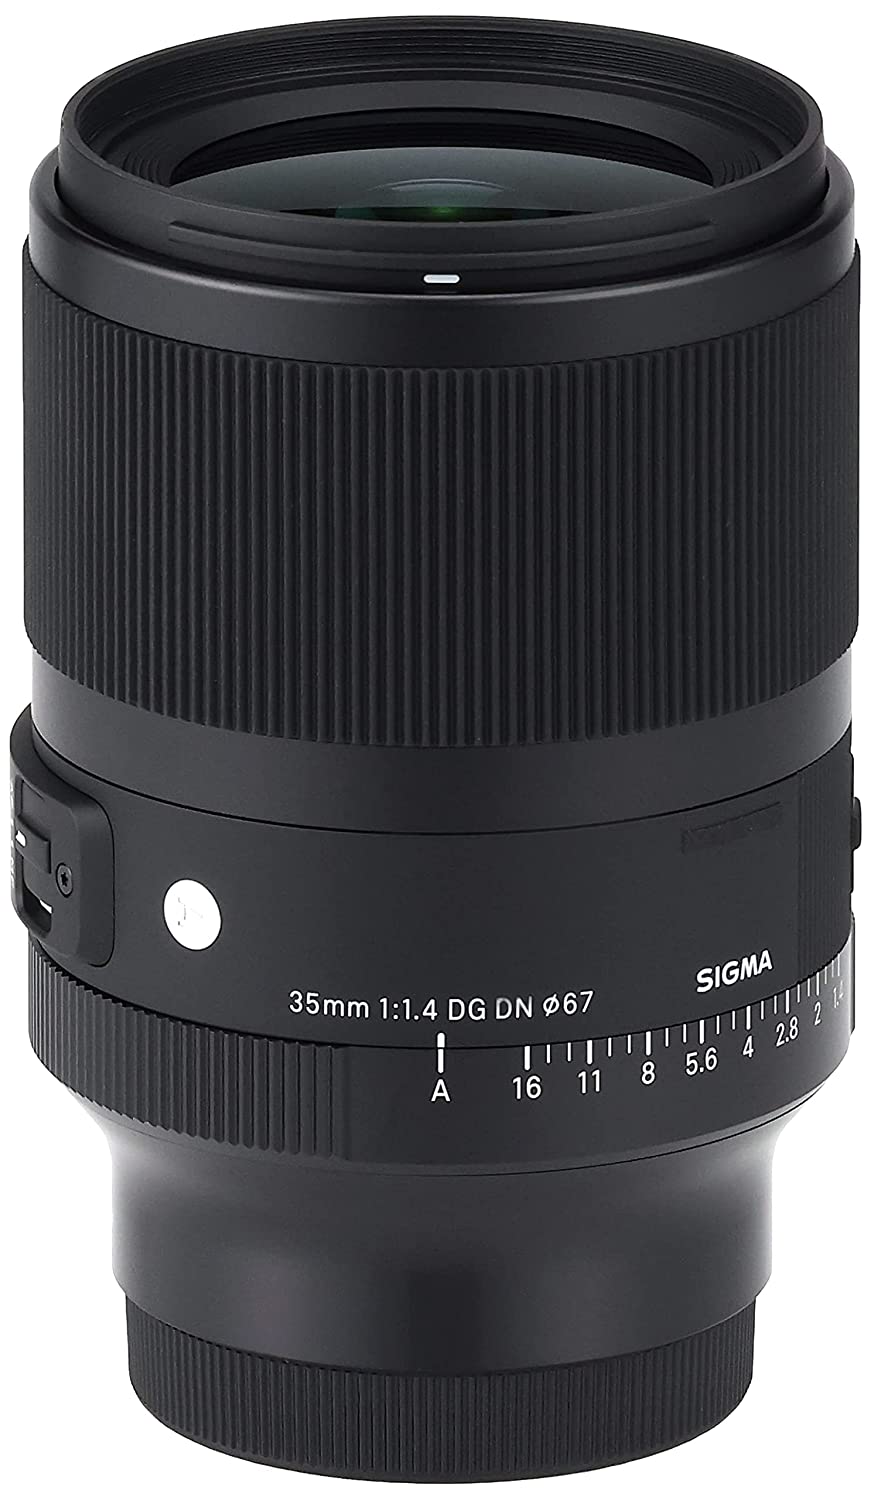 Used Sigma 35mm f/1.4 DG DN Art Lens for Sony E Mount Mirrorless Cameras